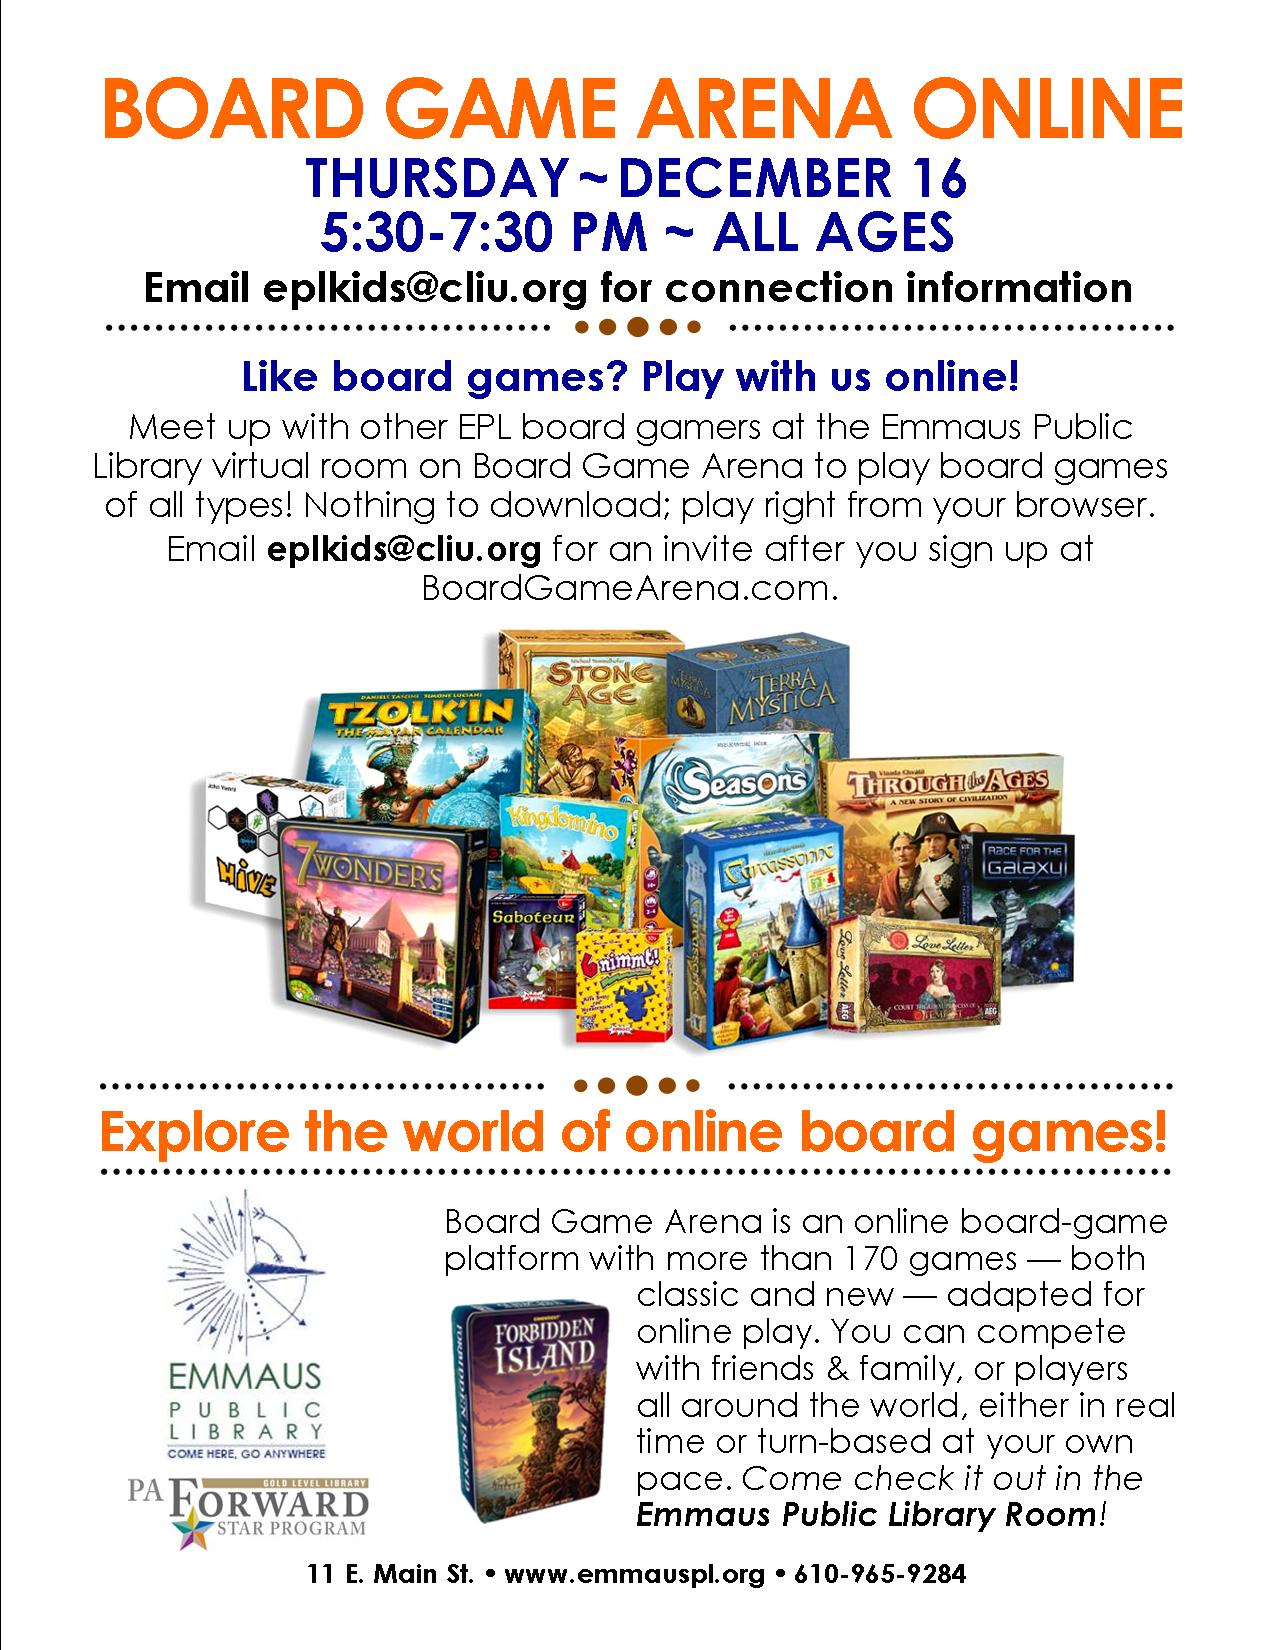 ONLINE: Board Game Arena - Emmaus Public Library